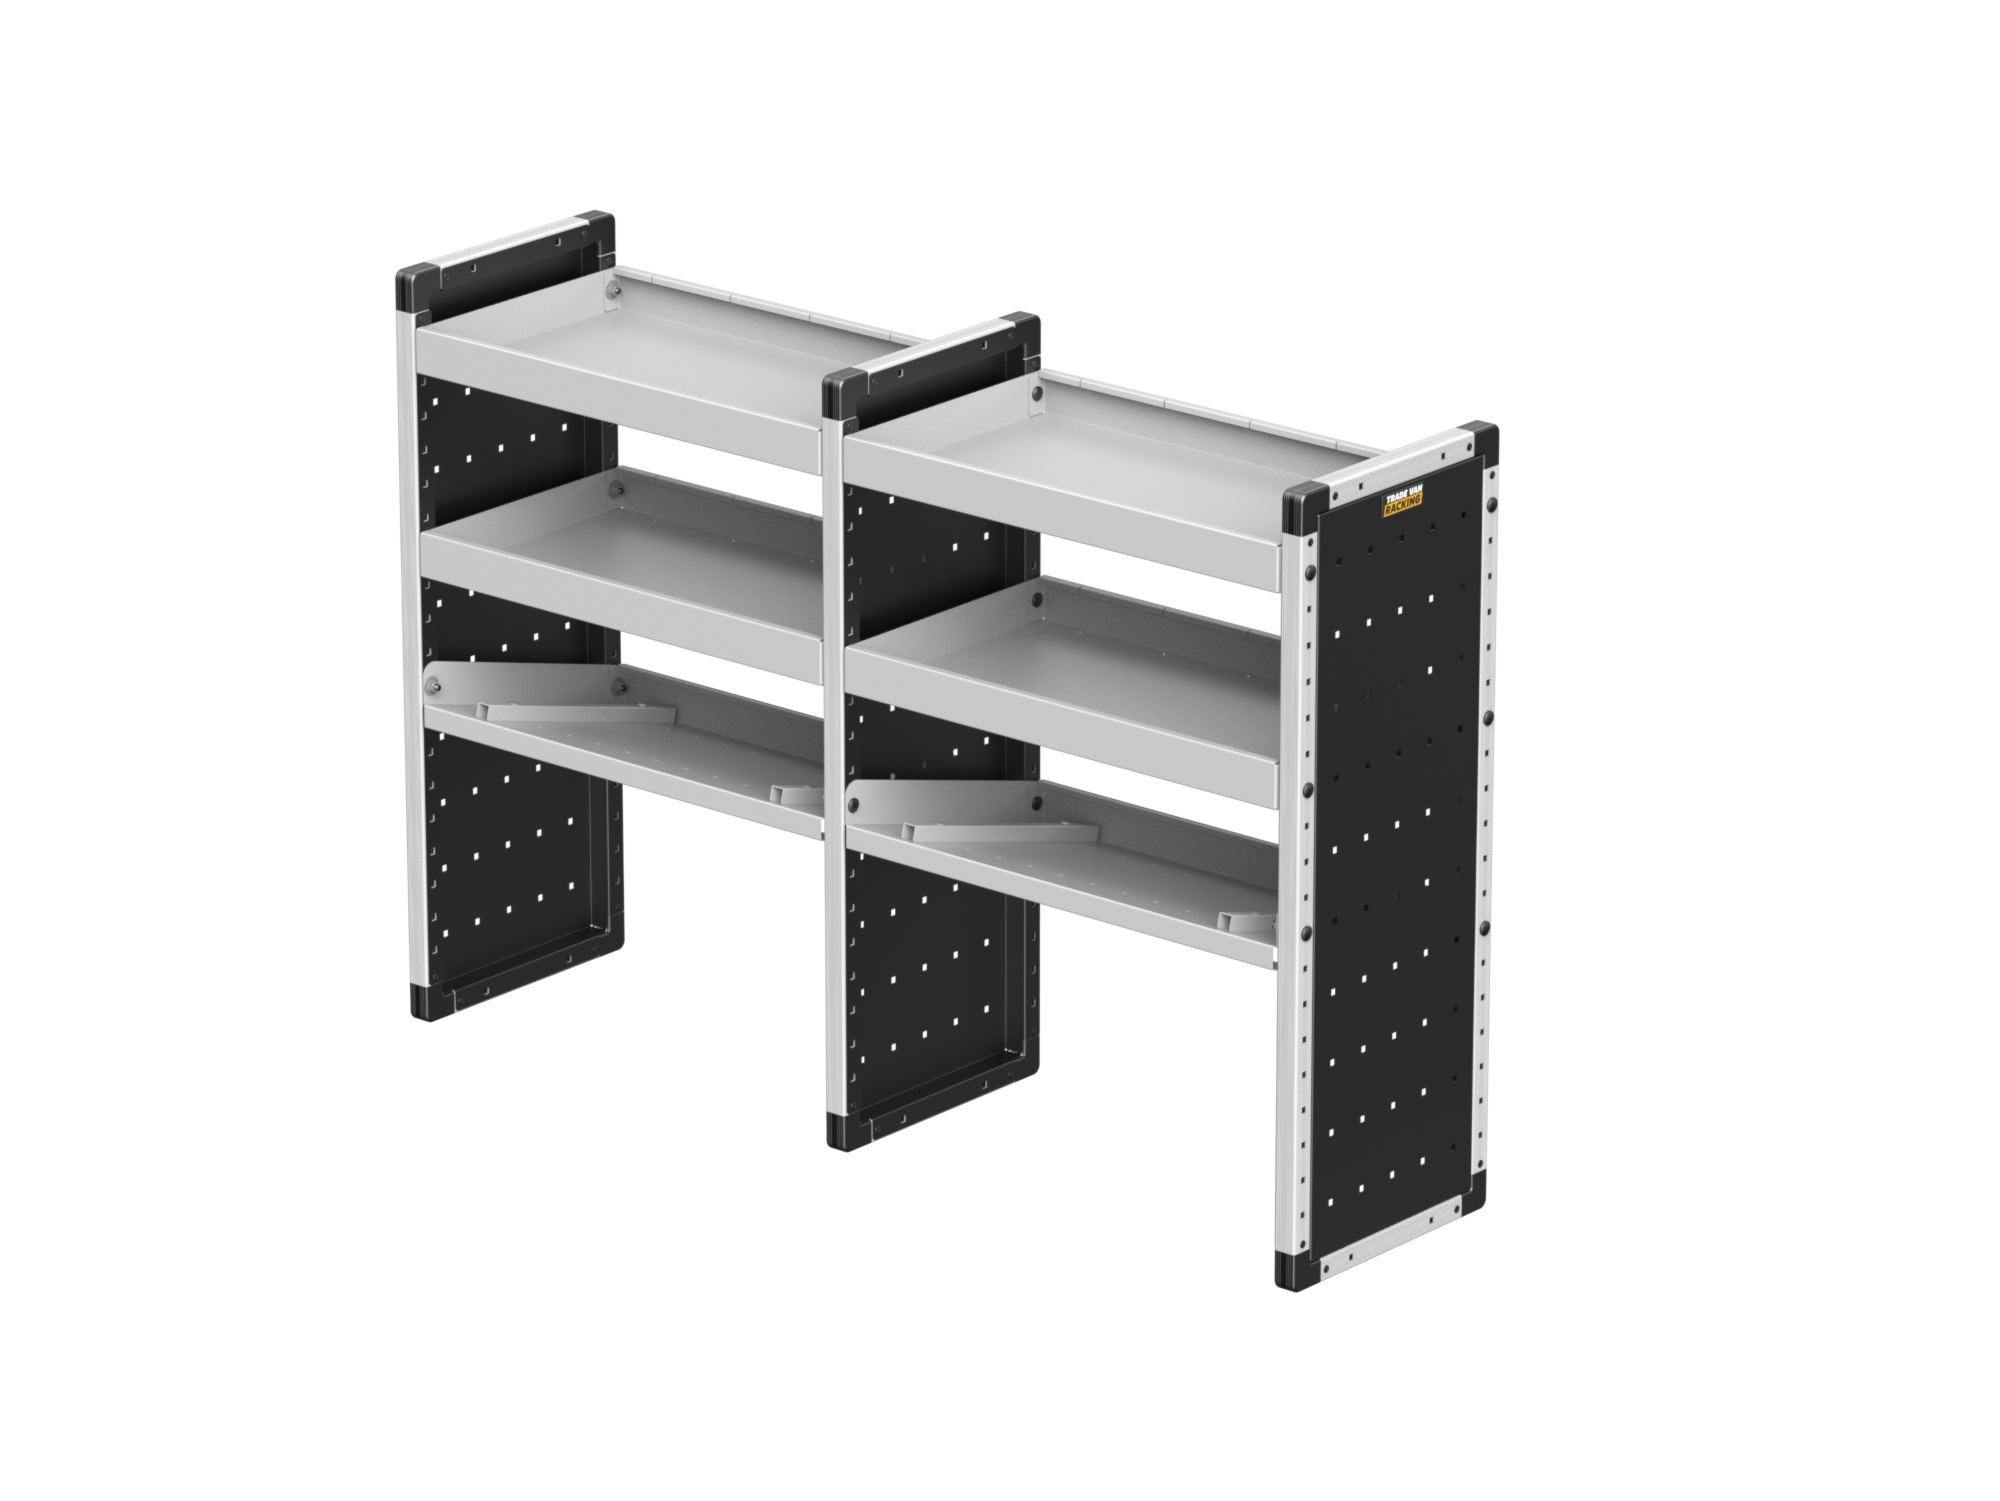 Trade Van Racking - Double Unit - 2 straight & 1 angled per bay - TVR-DBL-001